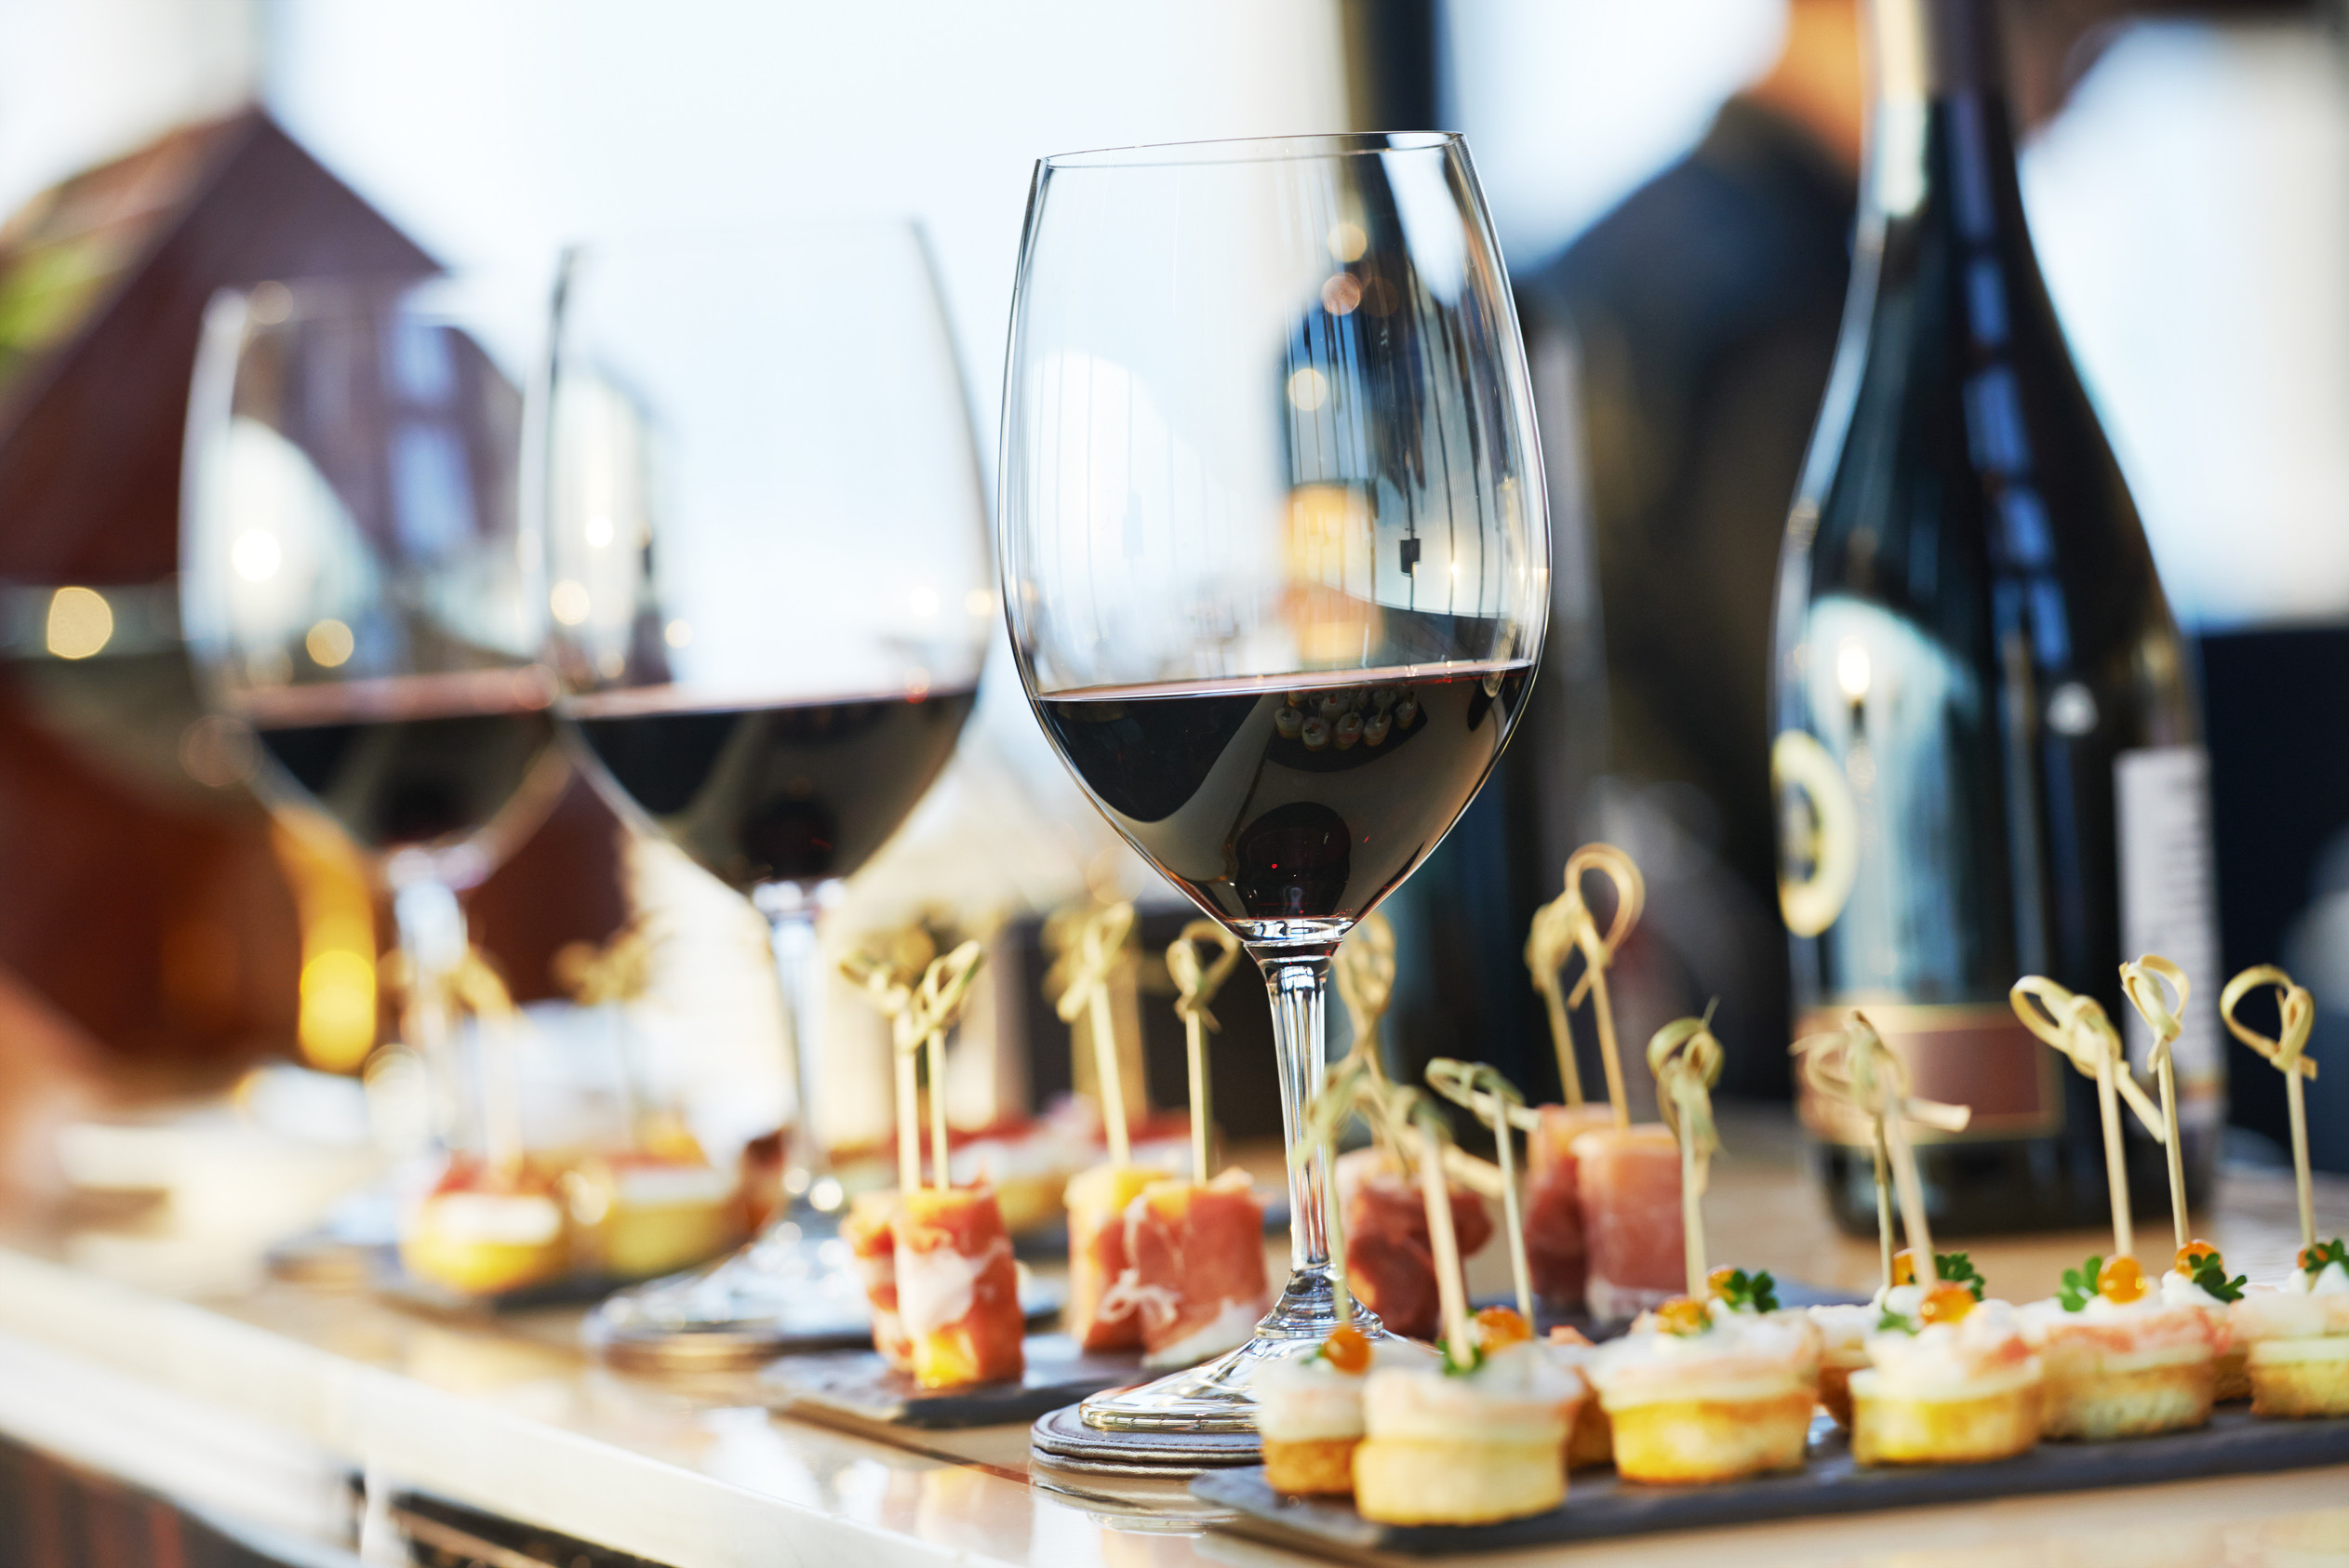 catering services background with snacks and glasses of wine on